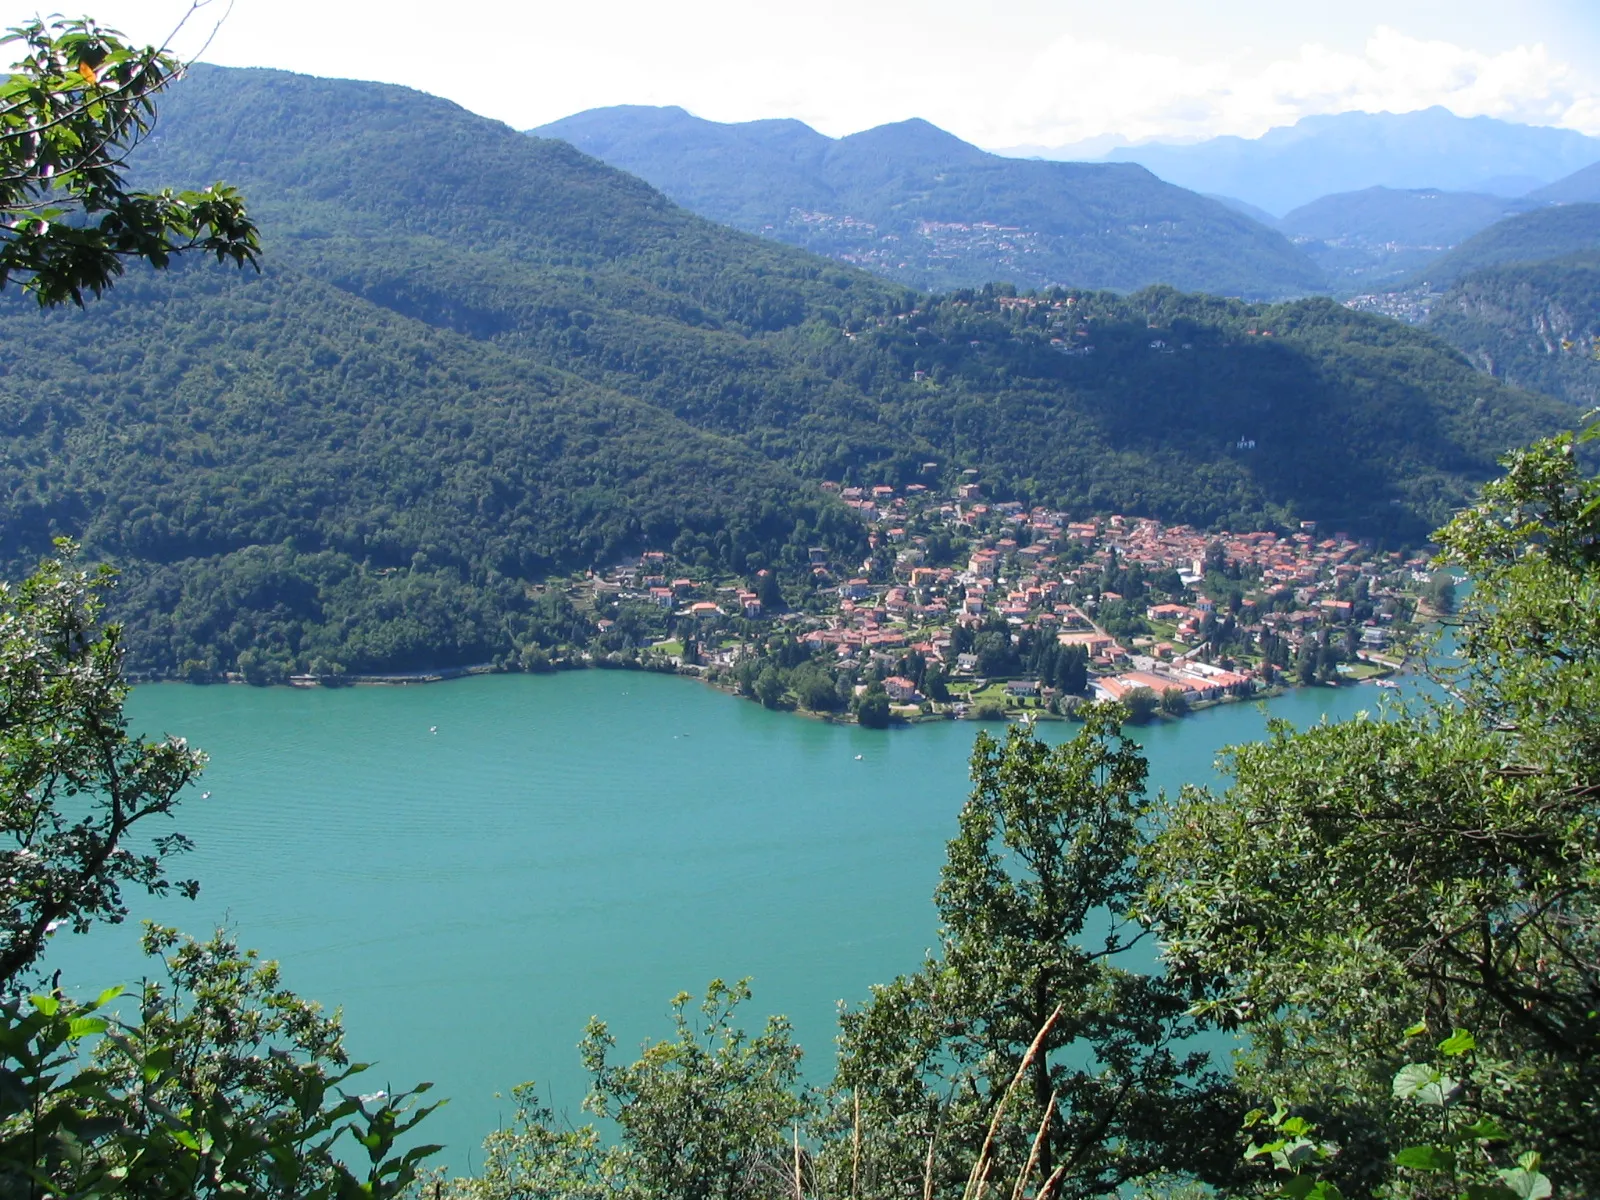 Photo showing: The village Brusimpiano (Italy, Varese) seen from the opposite side of the lake of Lugano (Ceresio) in Switzerland.